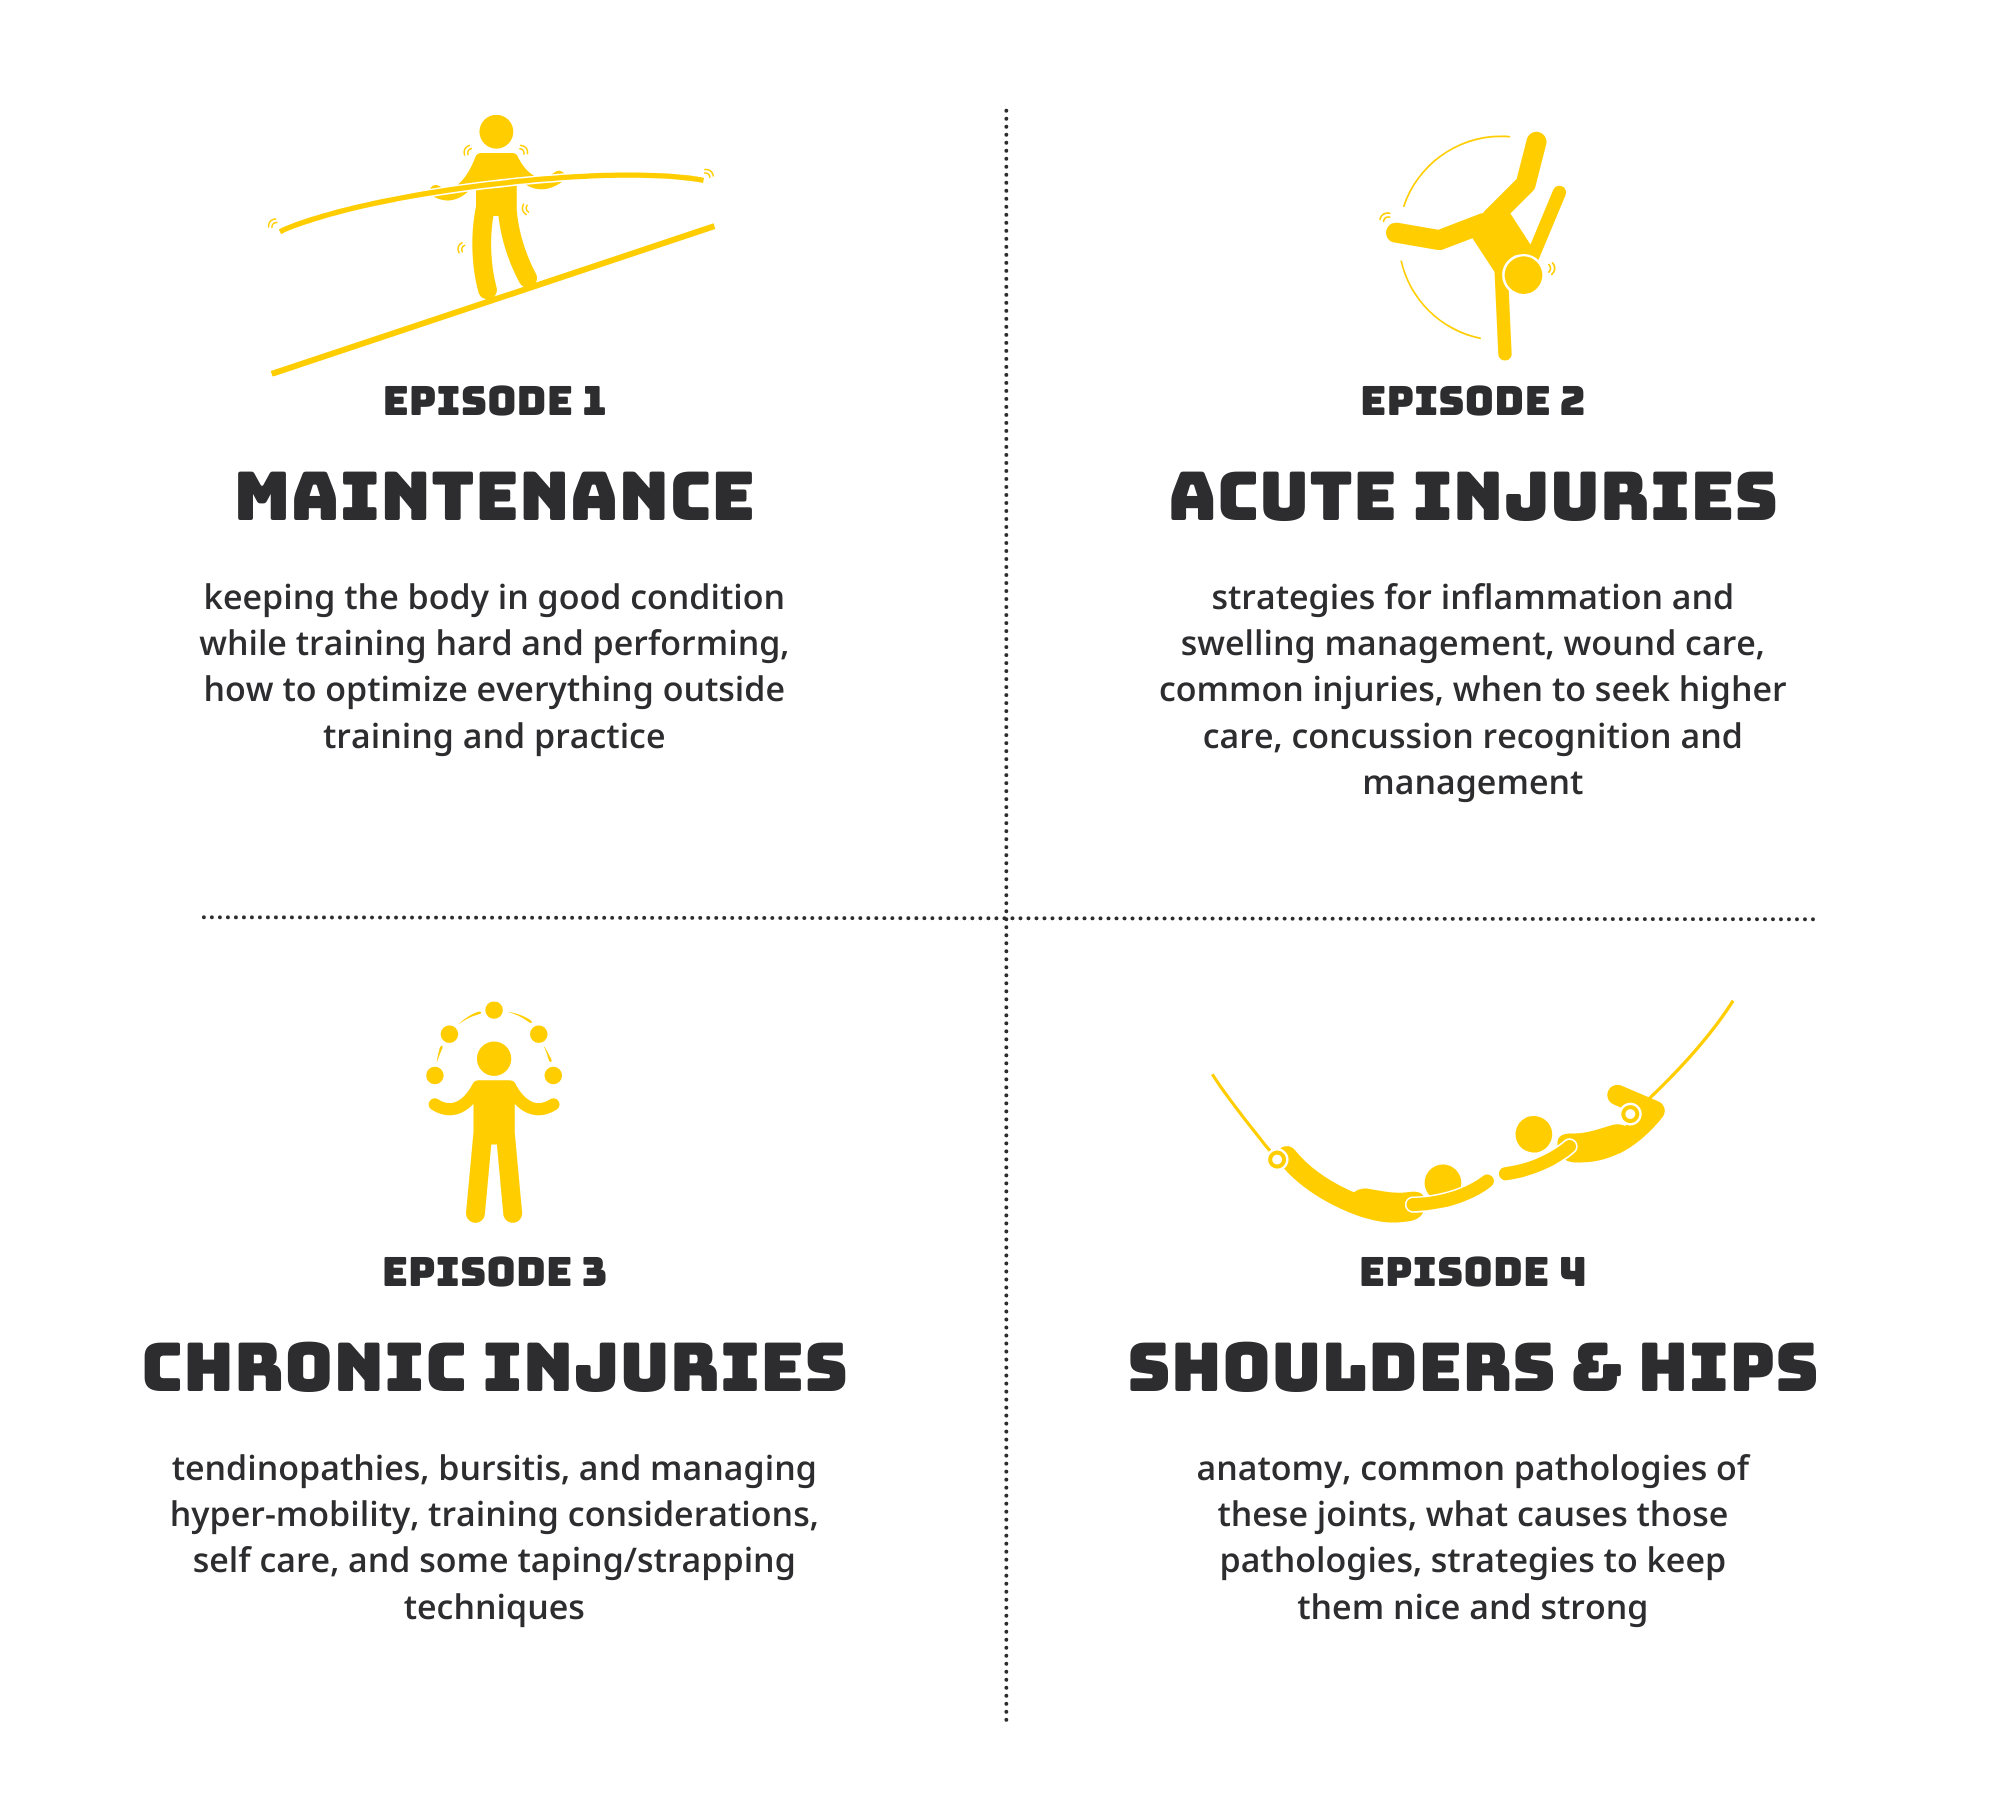 image describing the 4 episodes in the Physical Health Series: maintenance, acute injuries, chronic injuries, shoulders & hips